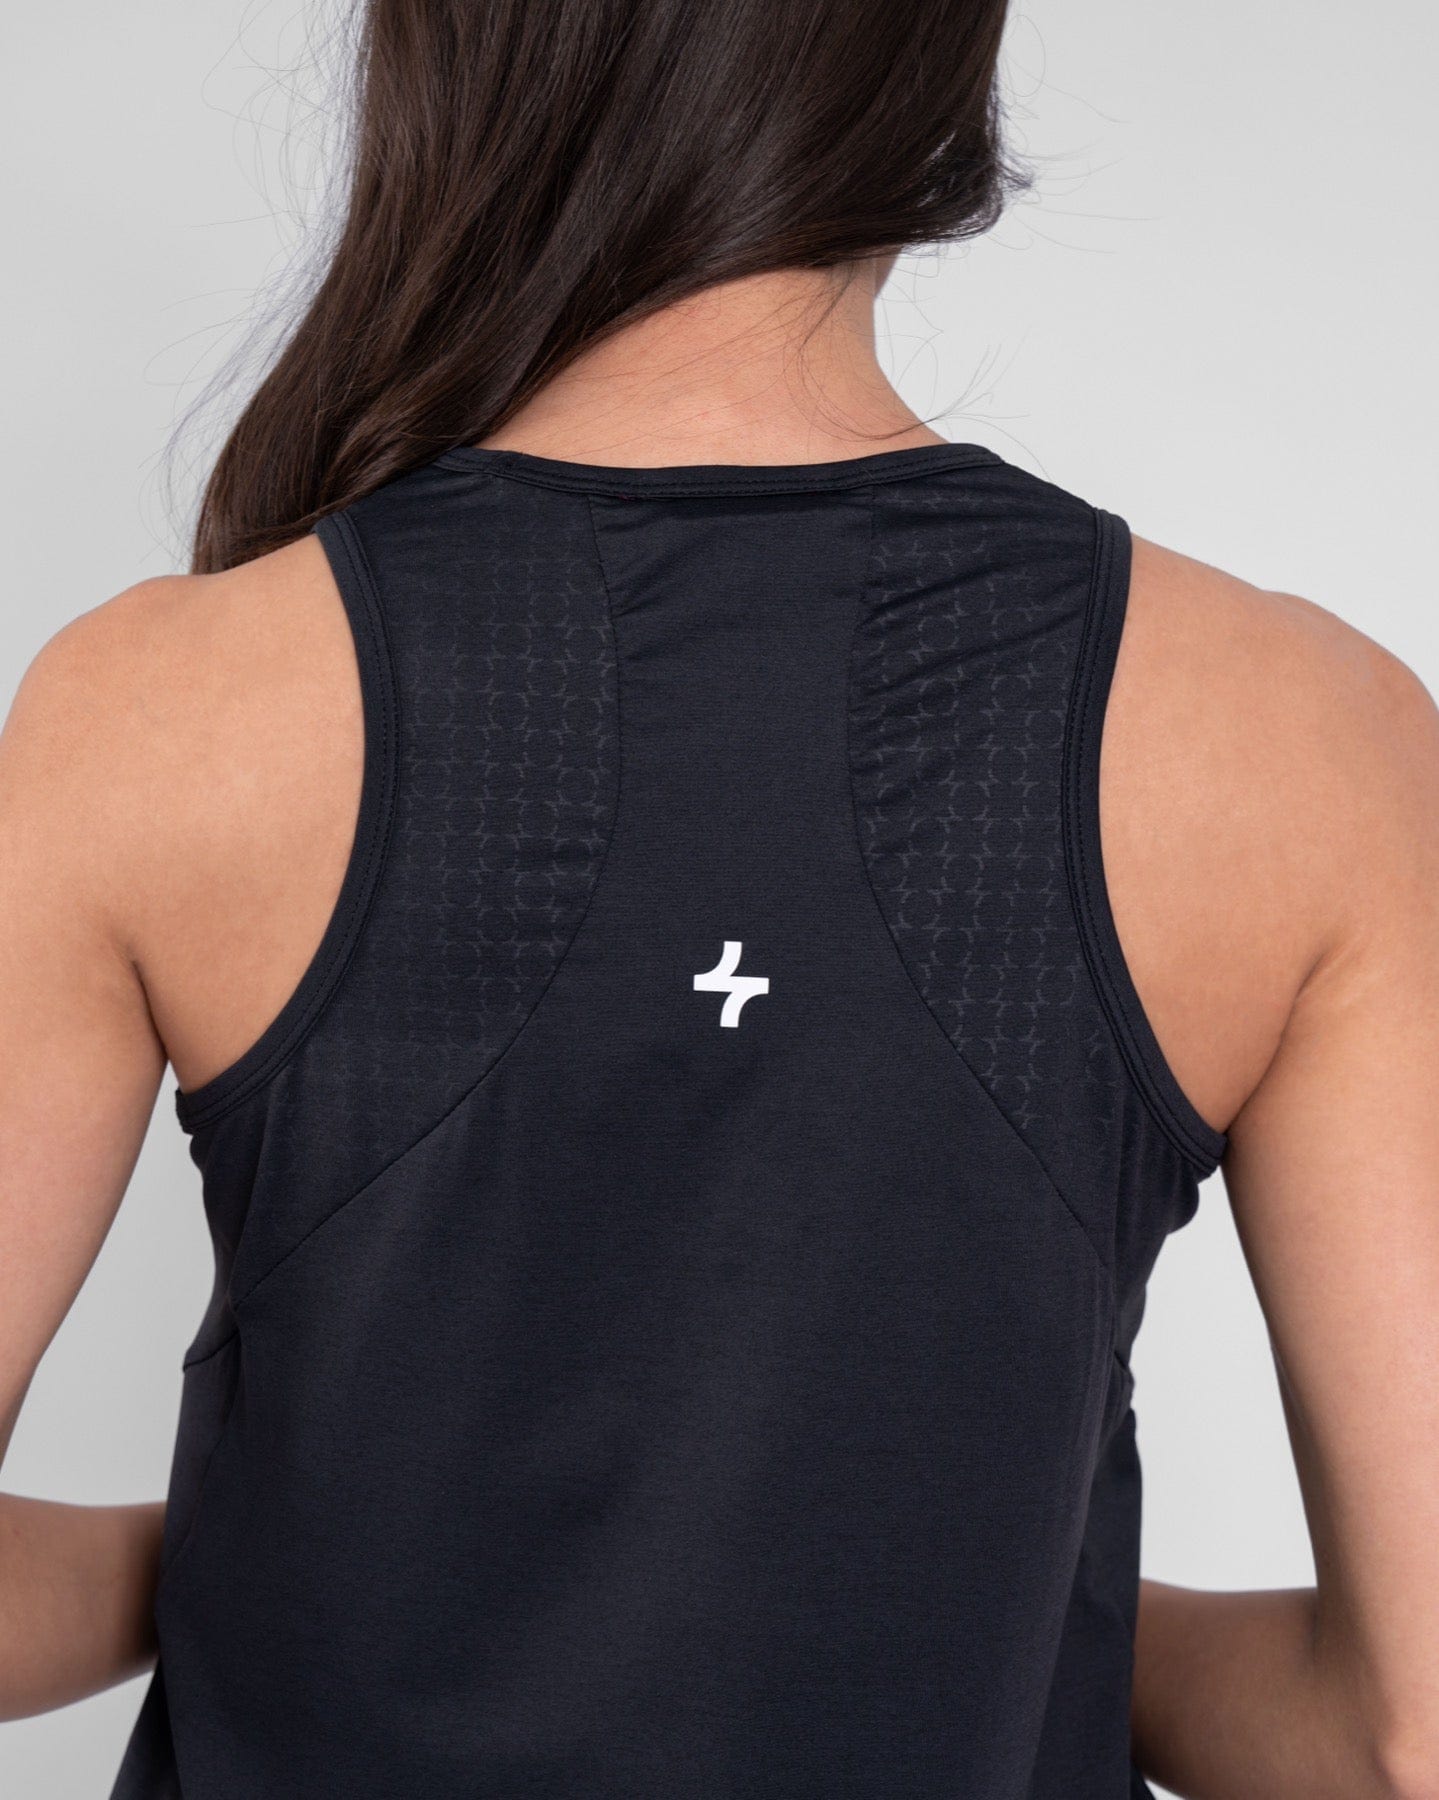 A woman from behind wearing a Black RUH TANK TOP, crafted with brrr° material for moisture resistance and body temperature regulation, showcases a qynda logo on the upper back.